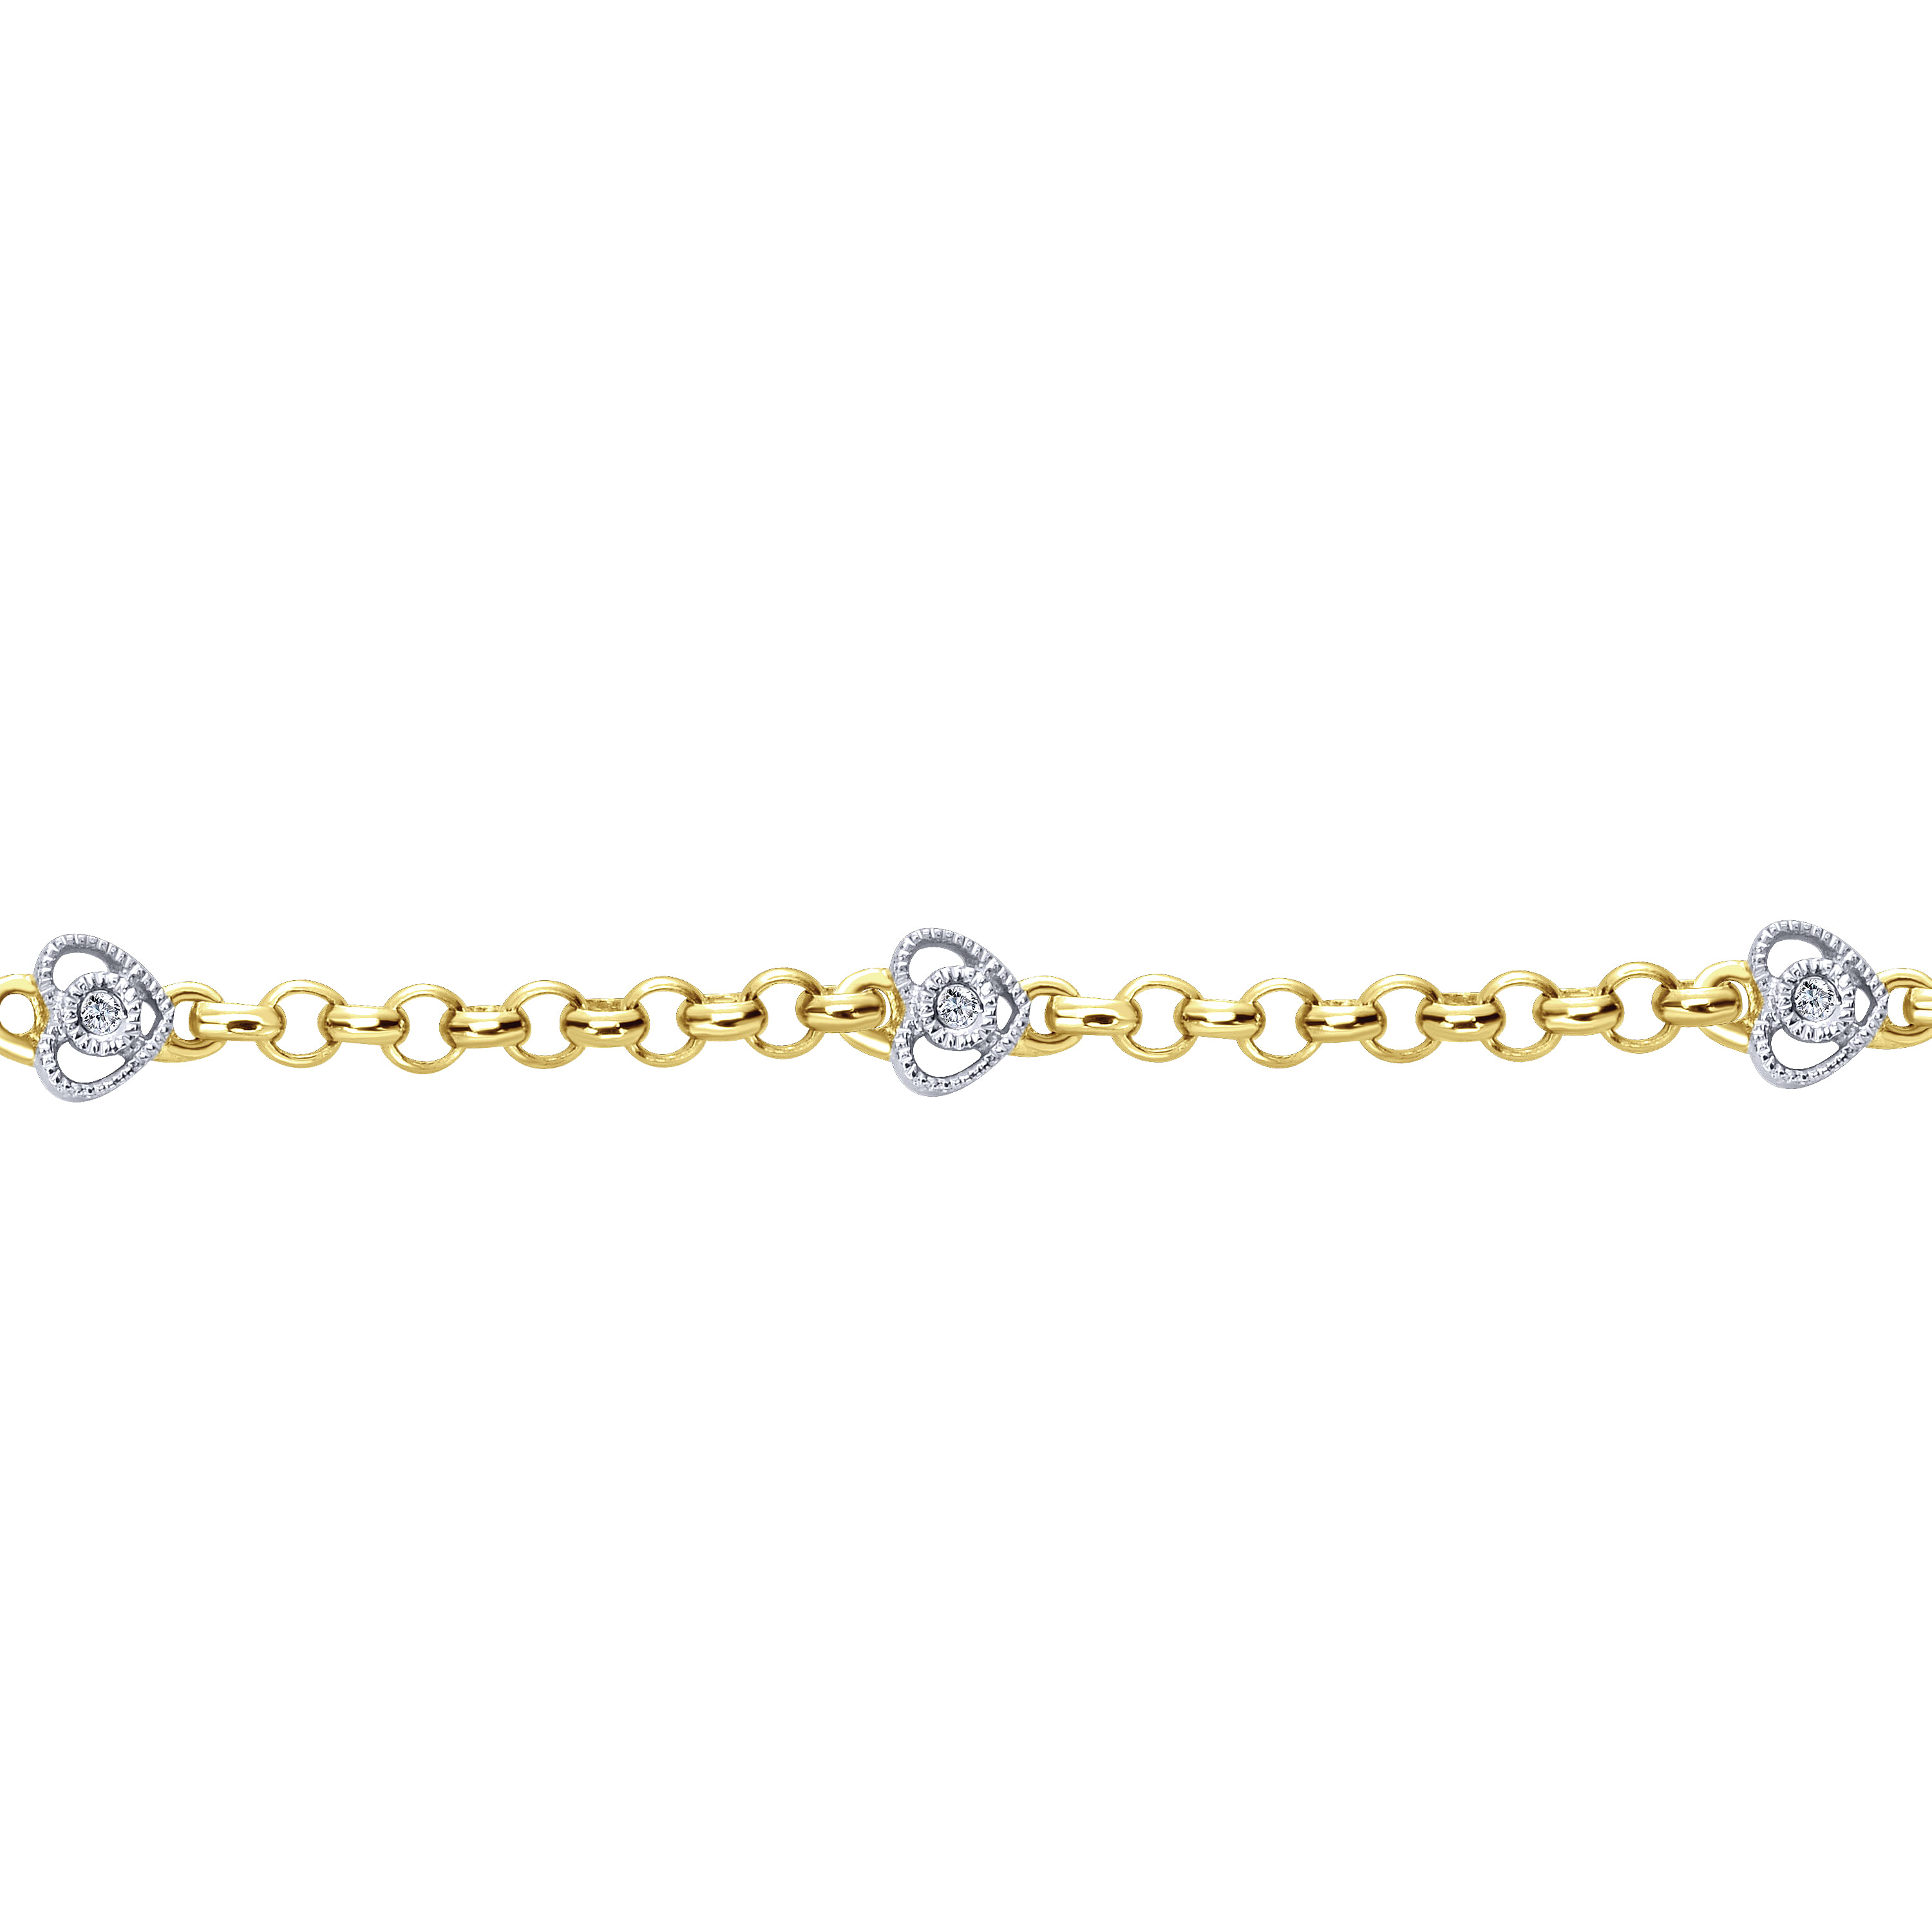 14K Yellow and White Gold Bracelet with Heart-Shaped Diamond Accents